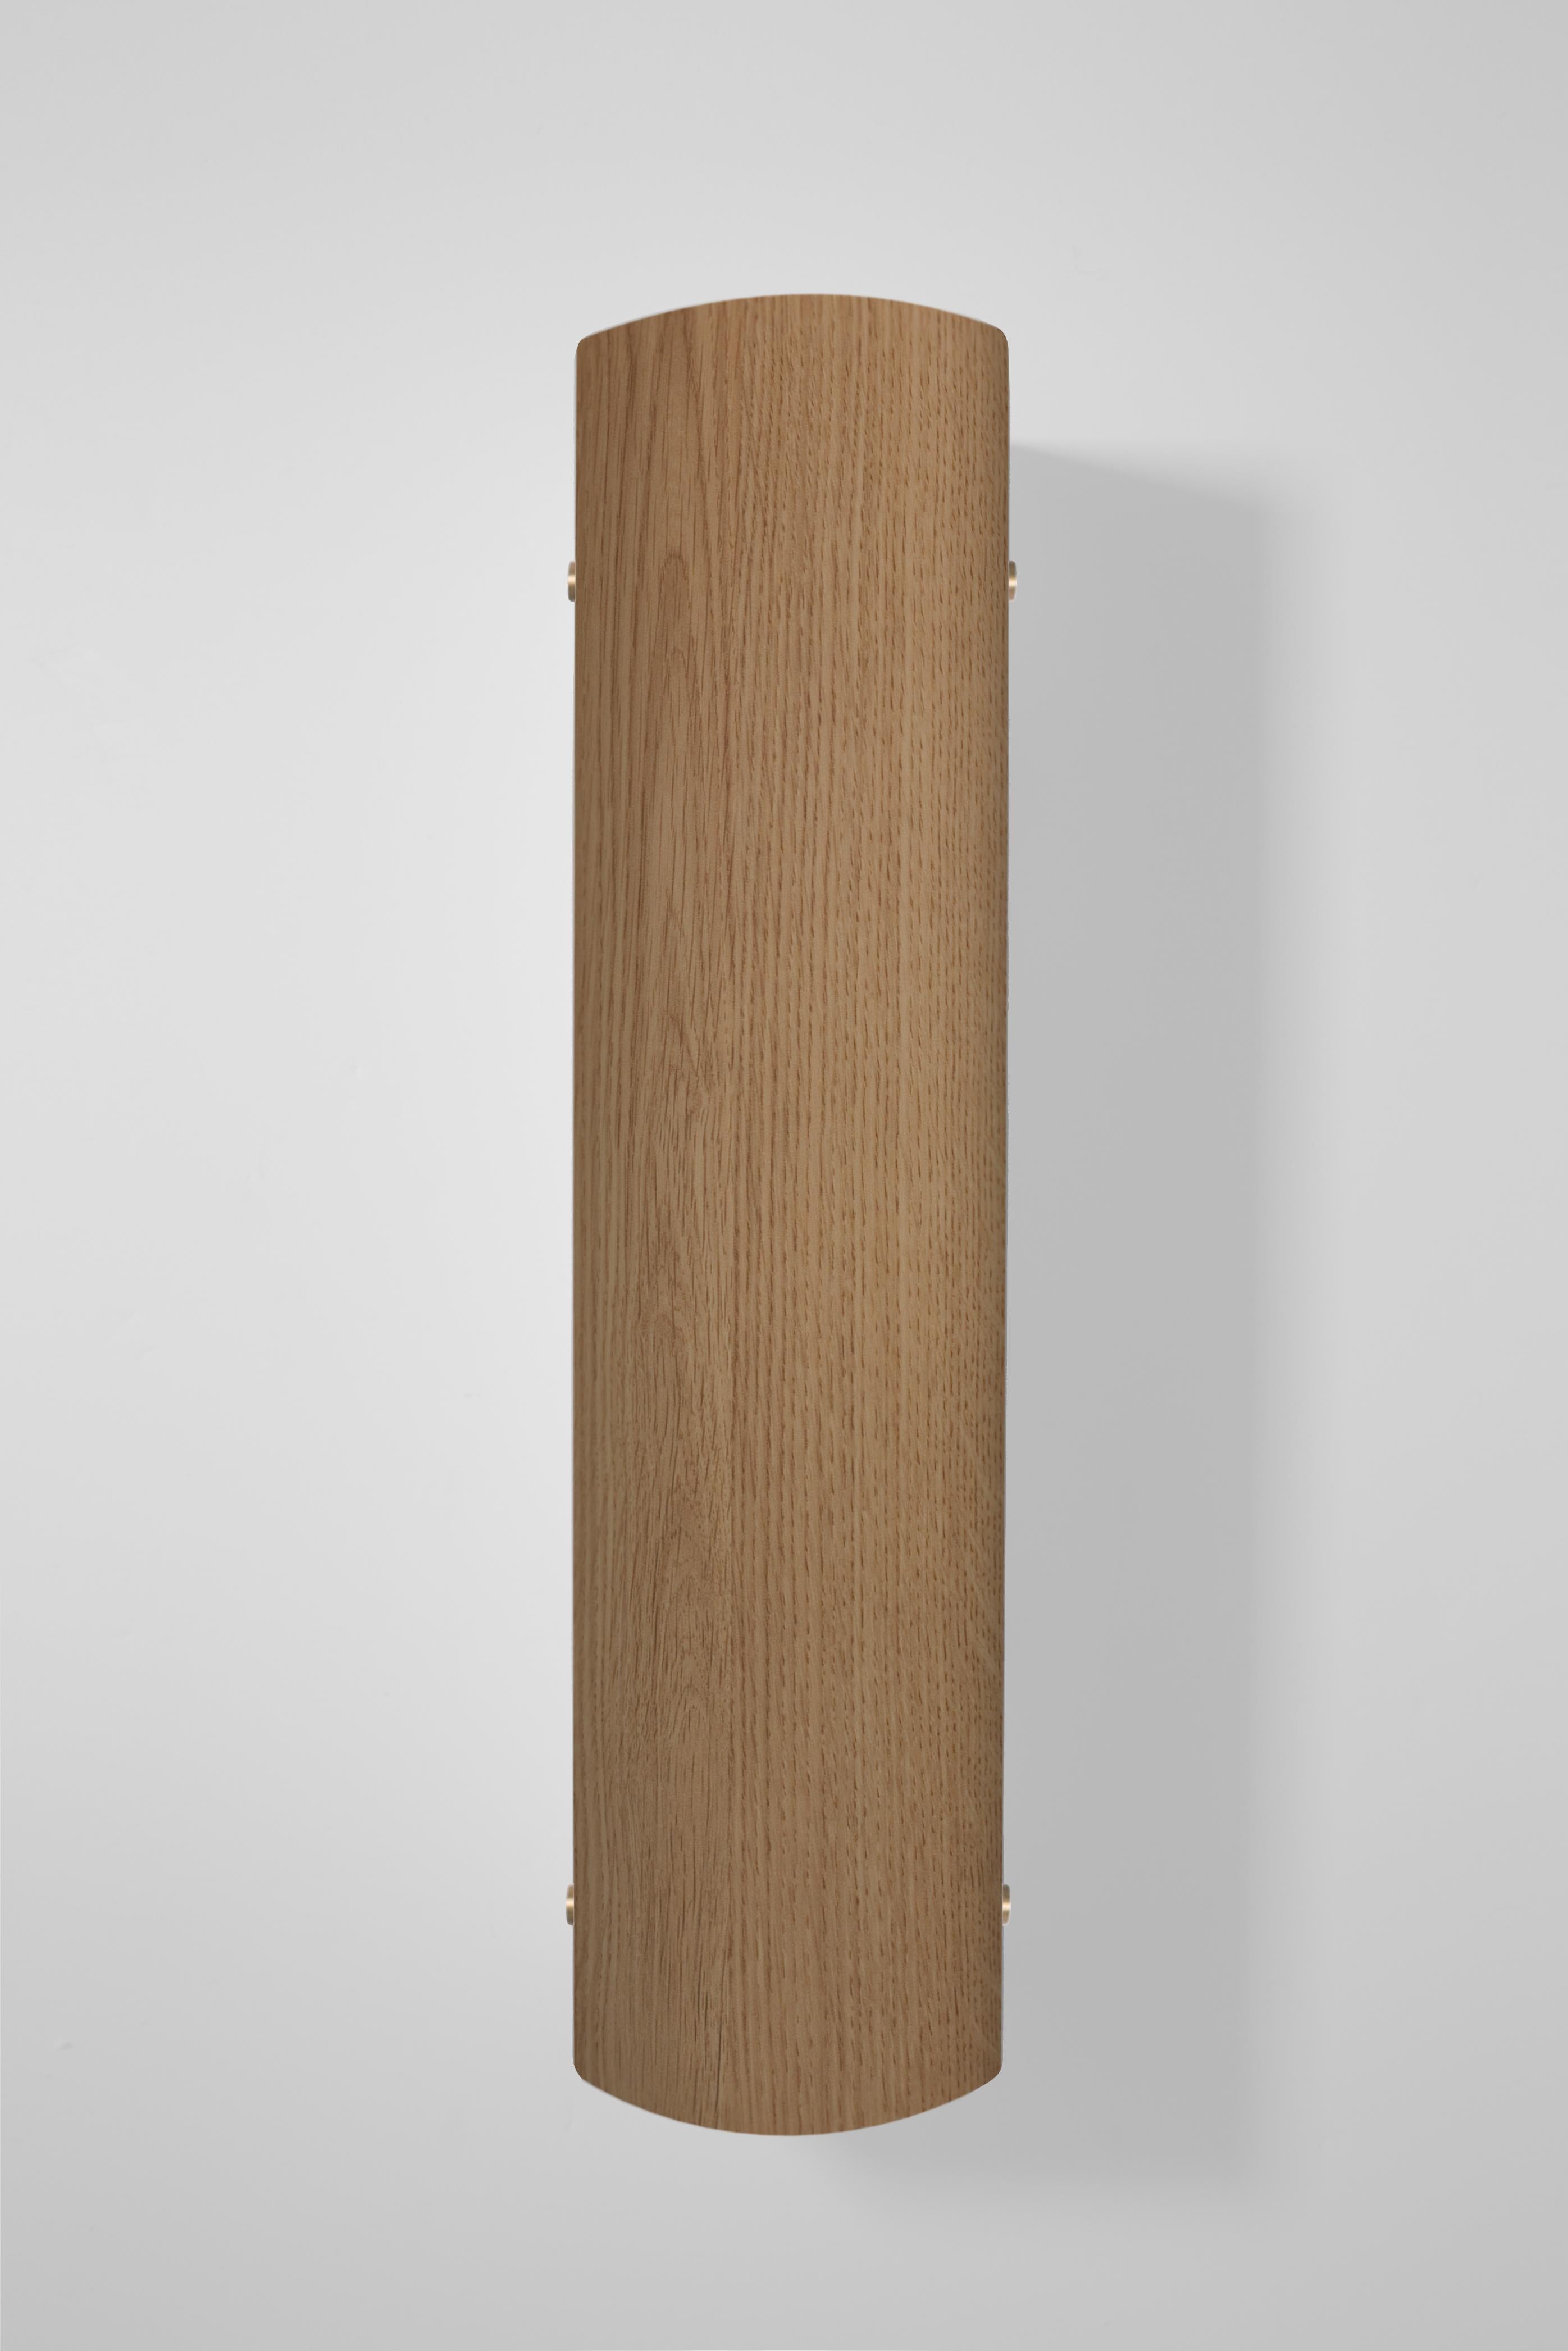 Orphan work 101W Sconce
Shown in oak with brushed brass.
Available in natural oak with brushed or blackened brass.
Measures: 19” H x 4 3/4” W x 4 1/2” D
Wall or ceiling mount
Vertical or horizontal
Plug-in by request
UL approved
Holds (2) 60W